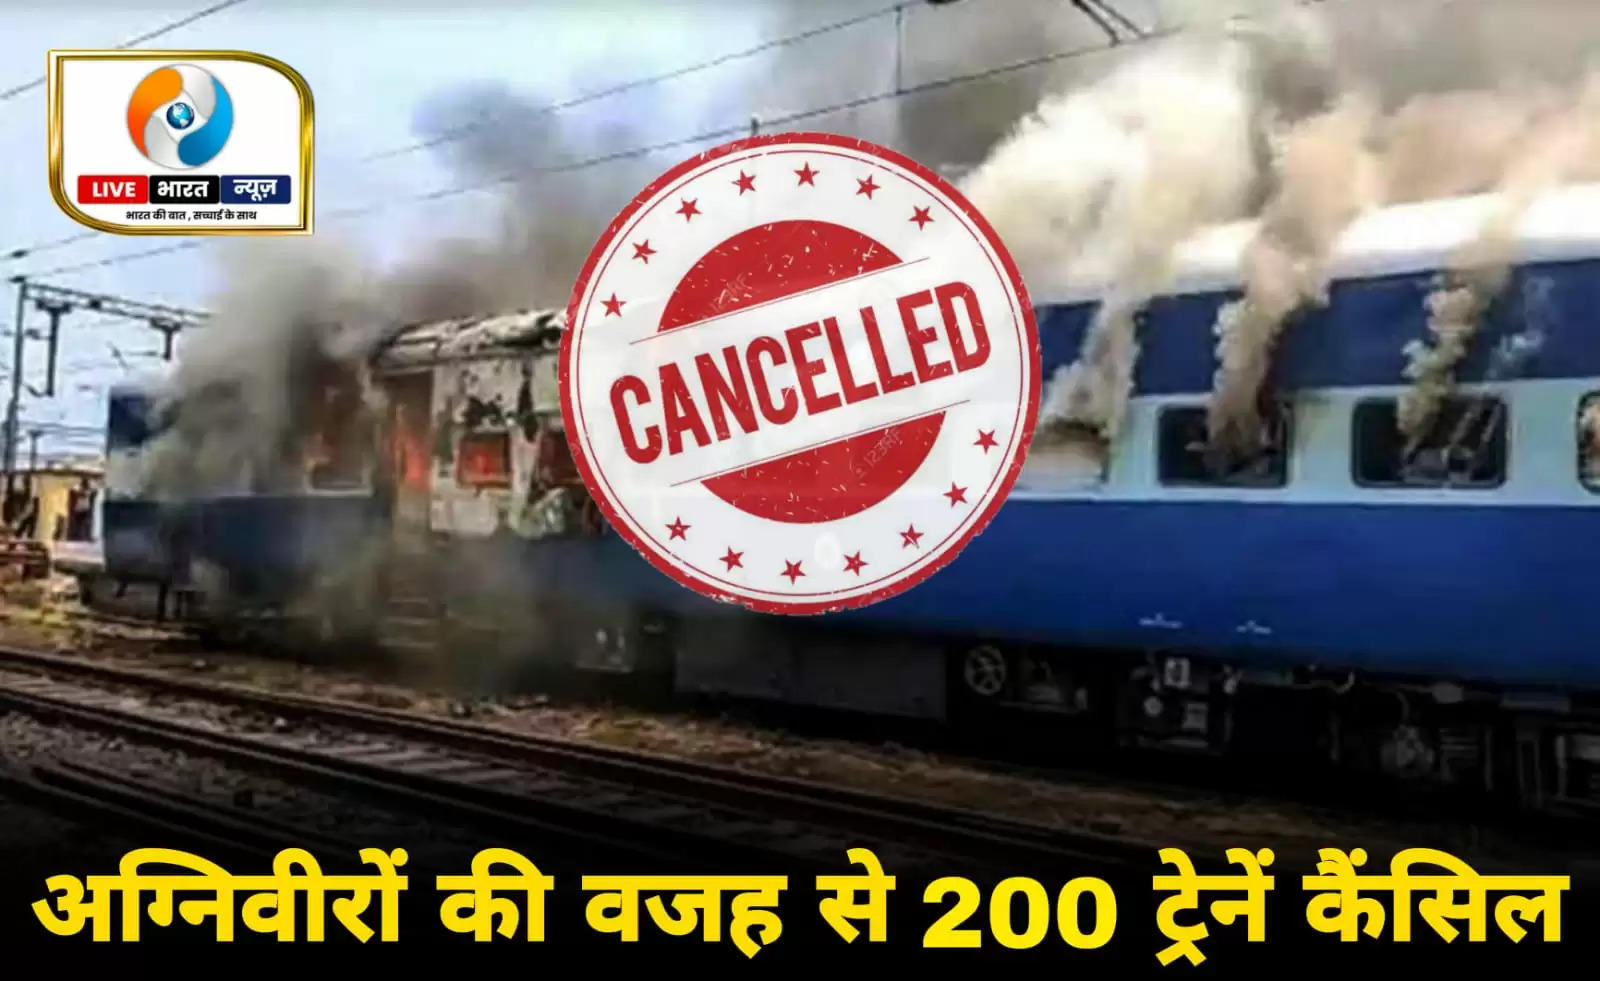 Agneepath demonstration: Operation of 200 trains affected due to firefighters, 35 trains canceled